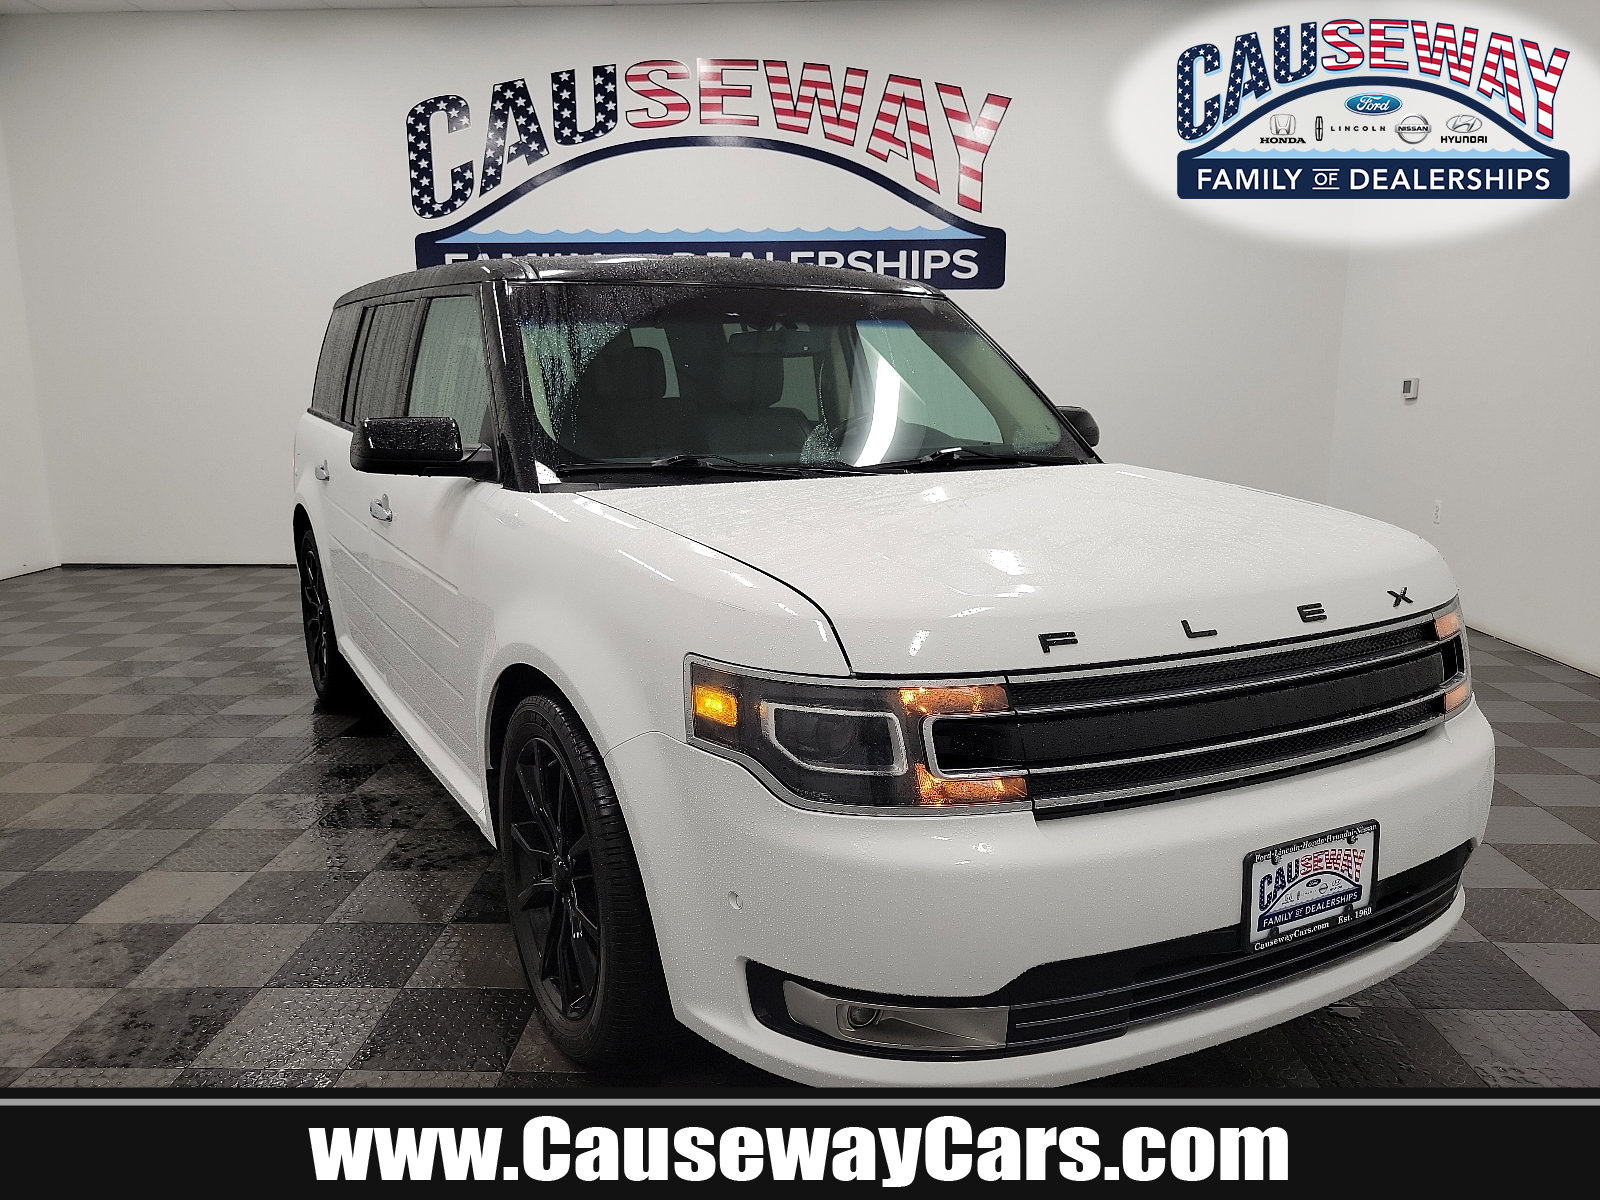 Used 2016 Ford Flex Limited for Sale - Kelley Blue Book